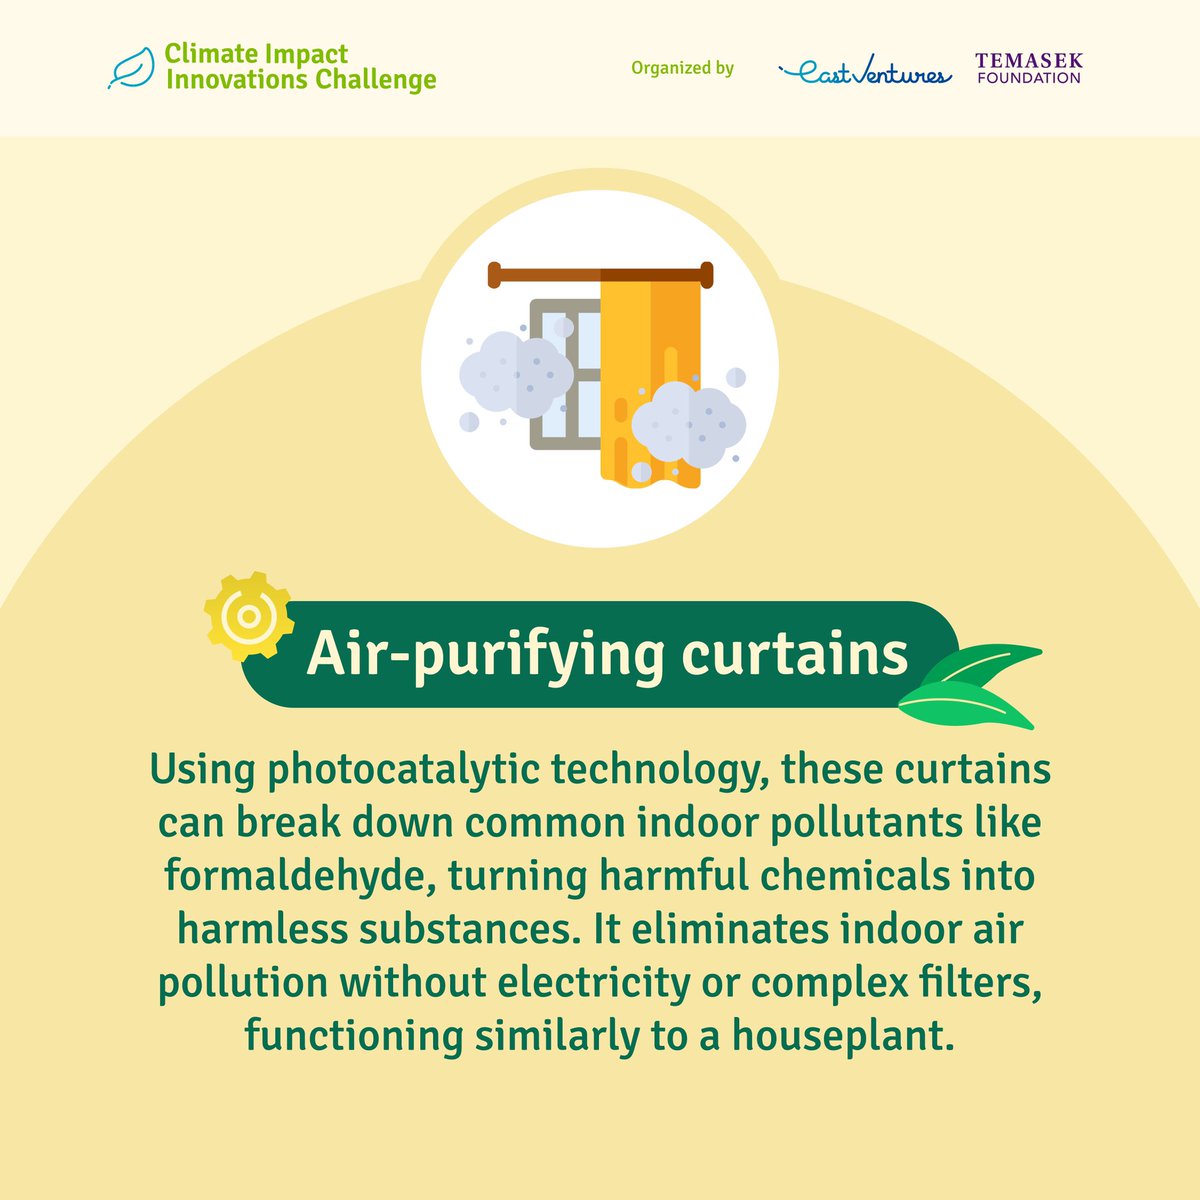 How technologies could dramatically change how we interact with our environment?

Let's explore
Hempcrete: Carbon sink that turns your home carbon-negative.
Solar paint: Turning paint into a power generator.
Air-purifying curtains: A natural air purifier that doesn't need plugs.